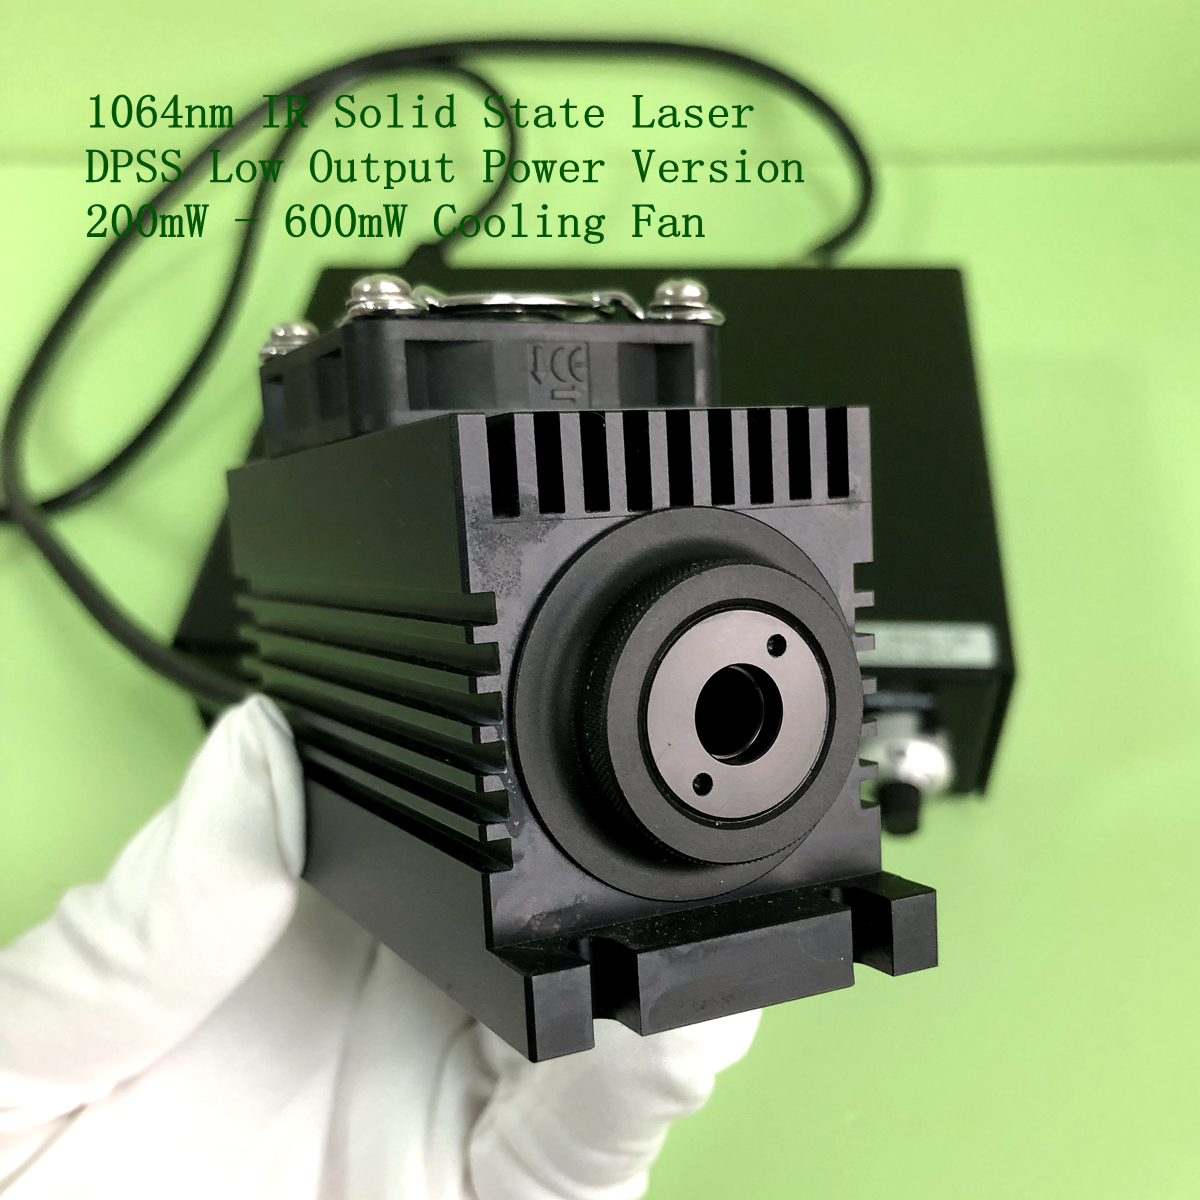 1064nm IR Solid State Laser DPSS Low Output Power Version 200mW - 600mW